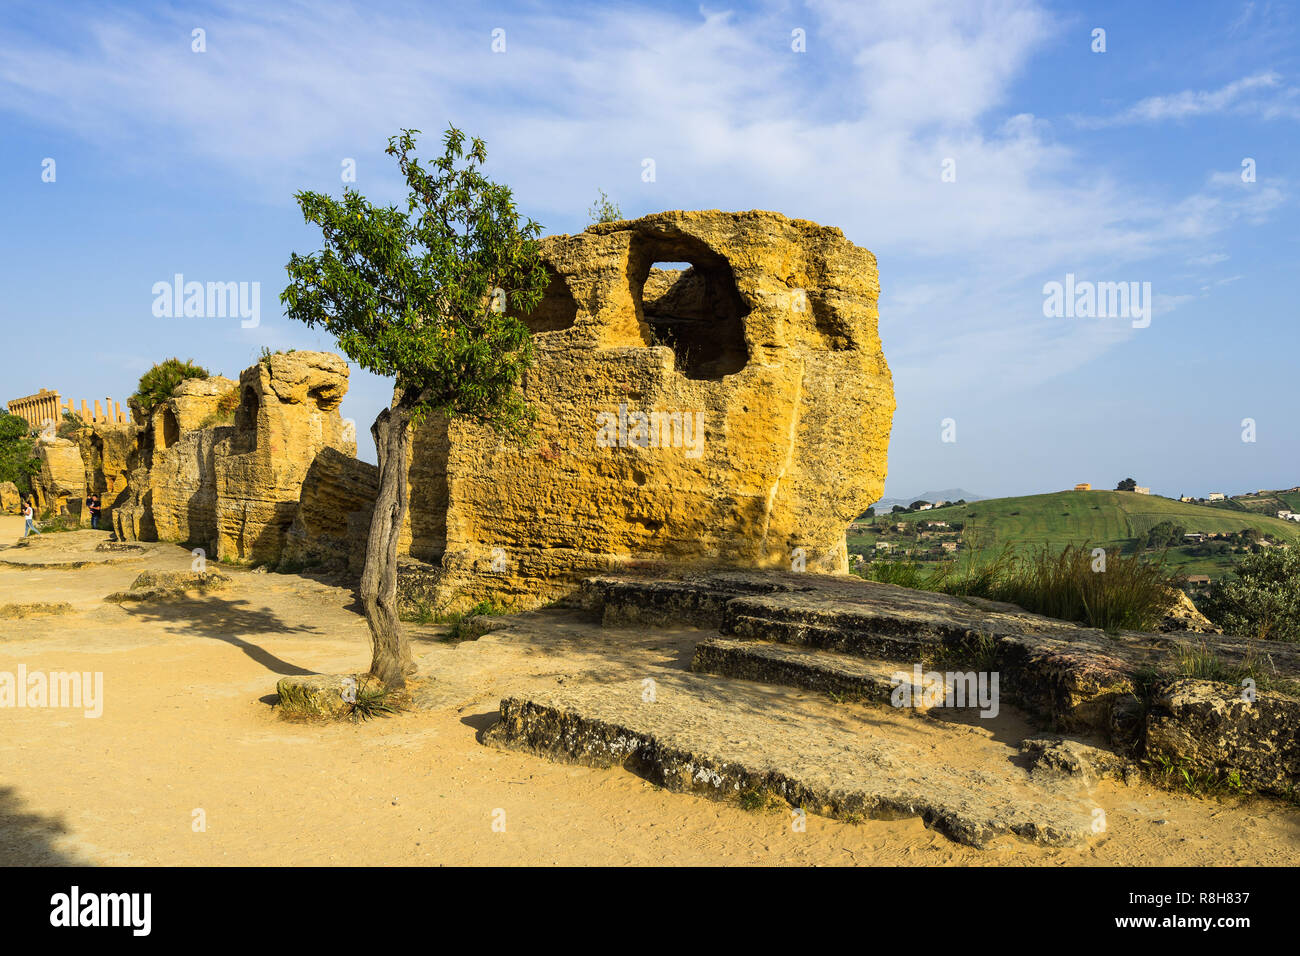 Ruins of early medieval necropolis at Valle dei Templi (Valley of the Temples), Agrigento, Sicily, Italy Stock Photo